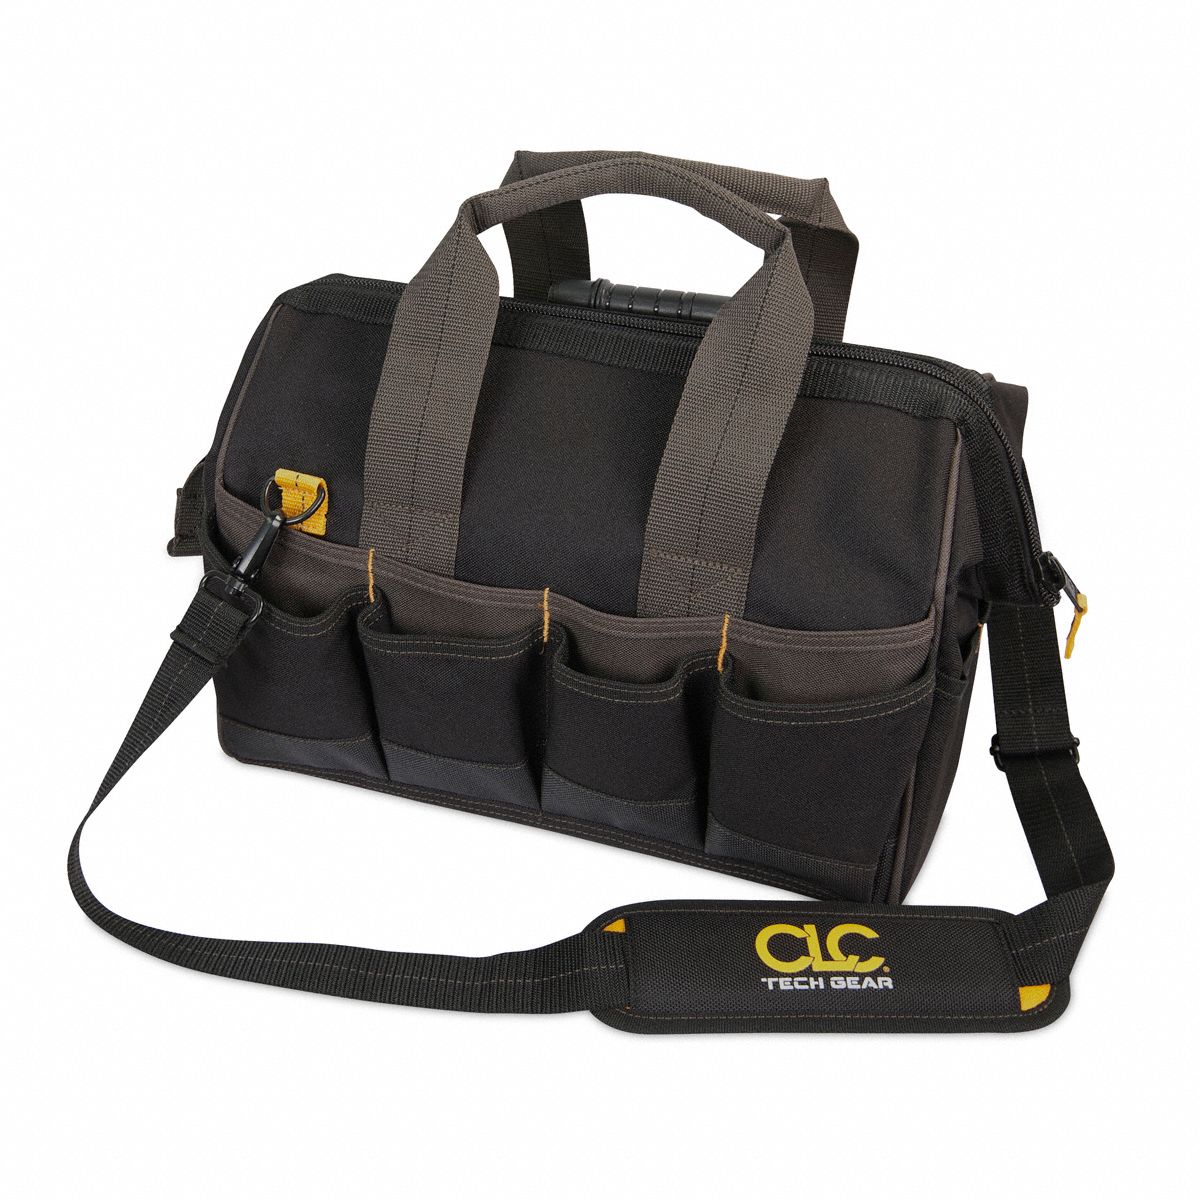 CLC Tool Bag: Polyester, 29 Pockets, 8 in Overall Wd, 14 in Overall Dp ...